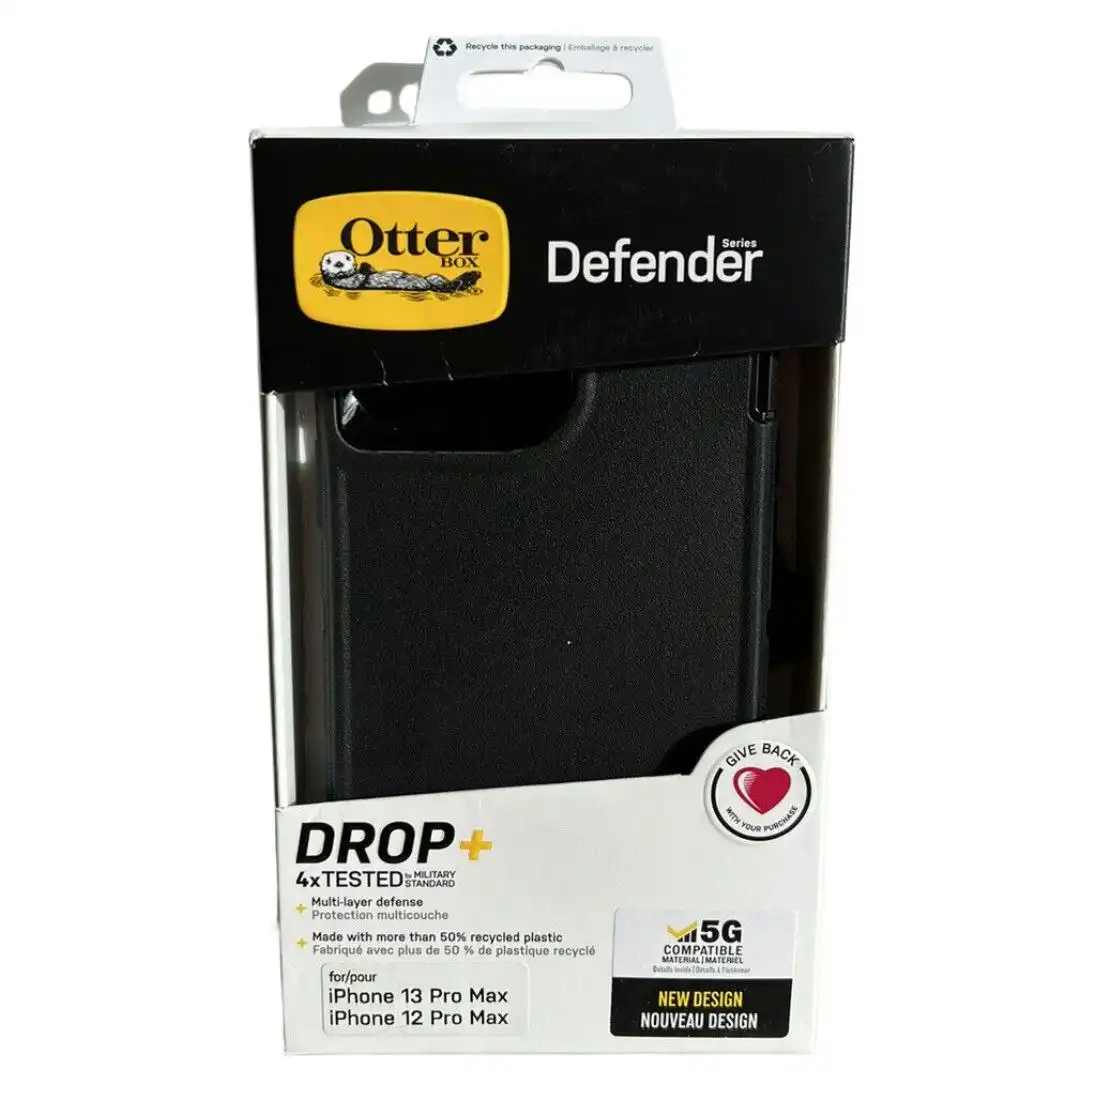 Otterbox Defender Case for iPhone 13 Pro Max - Black